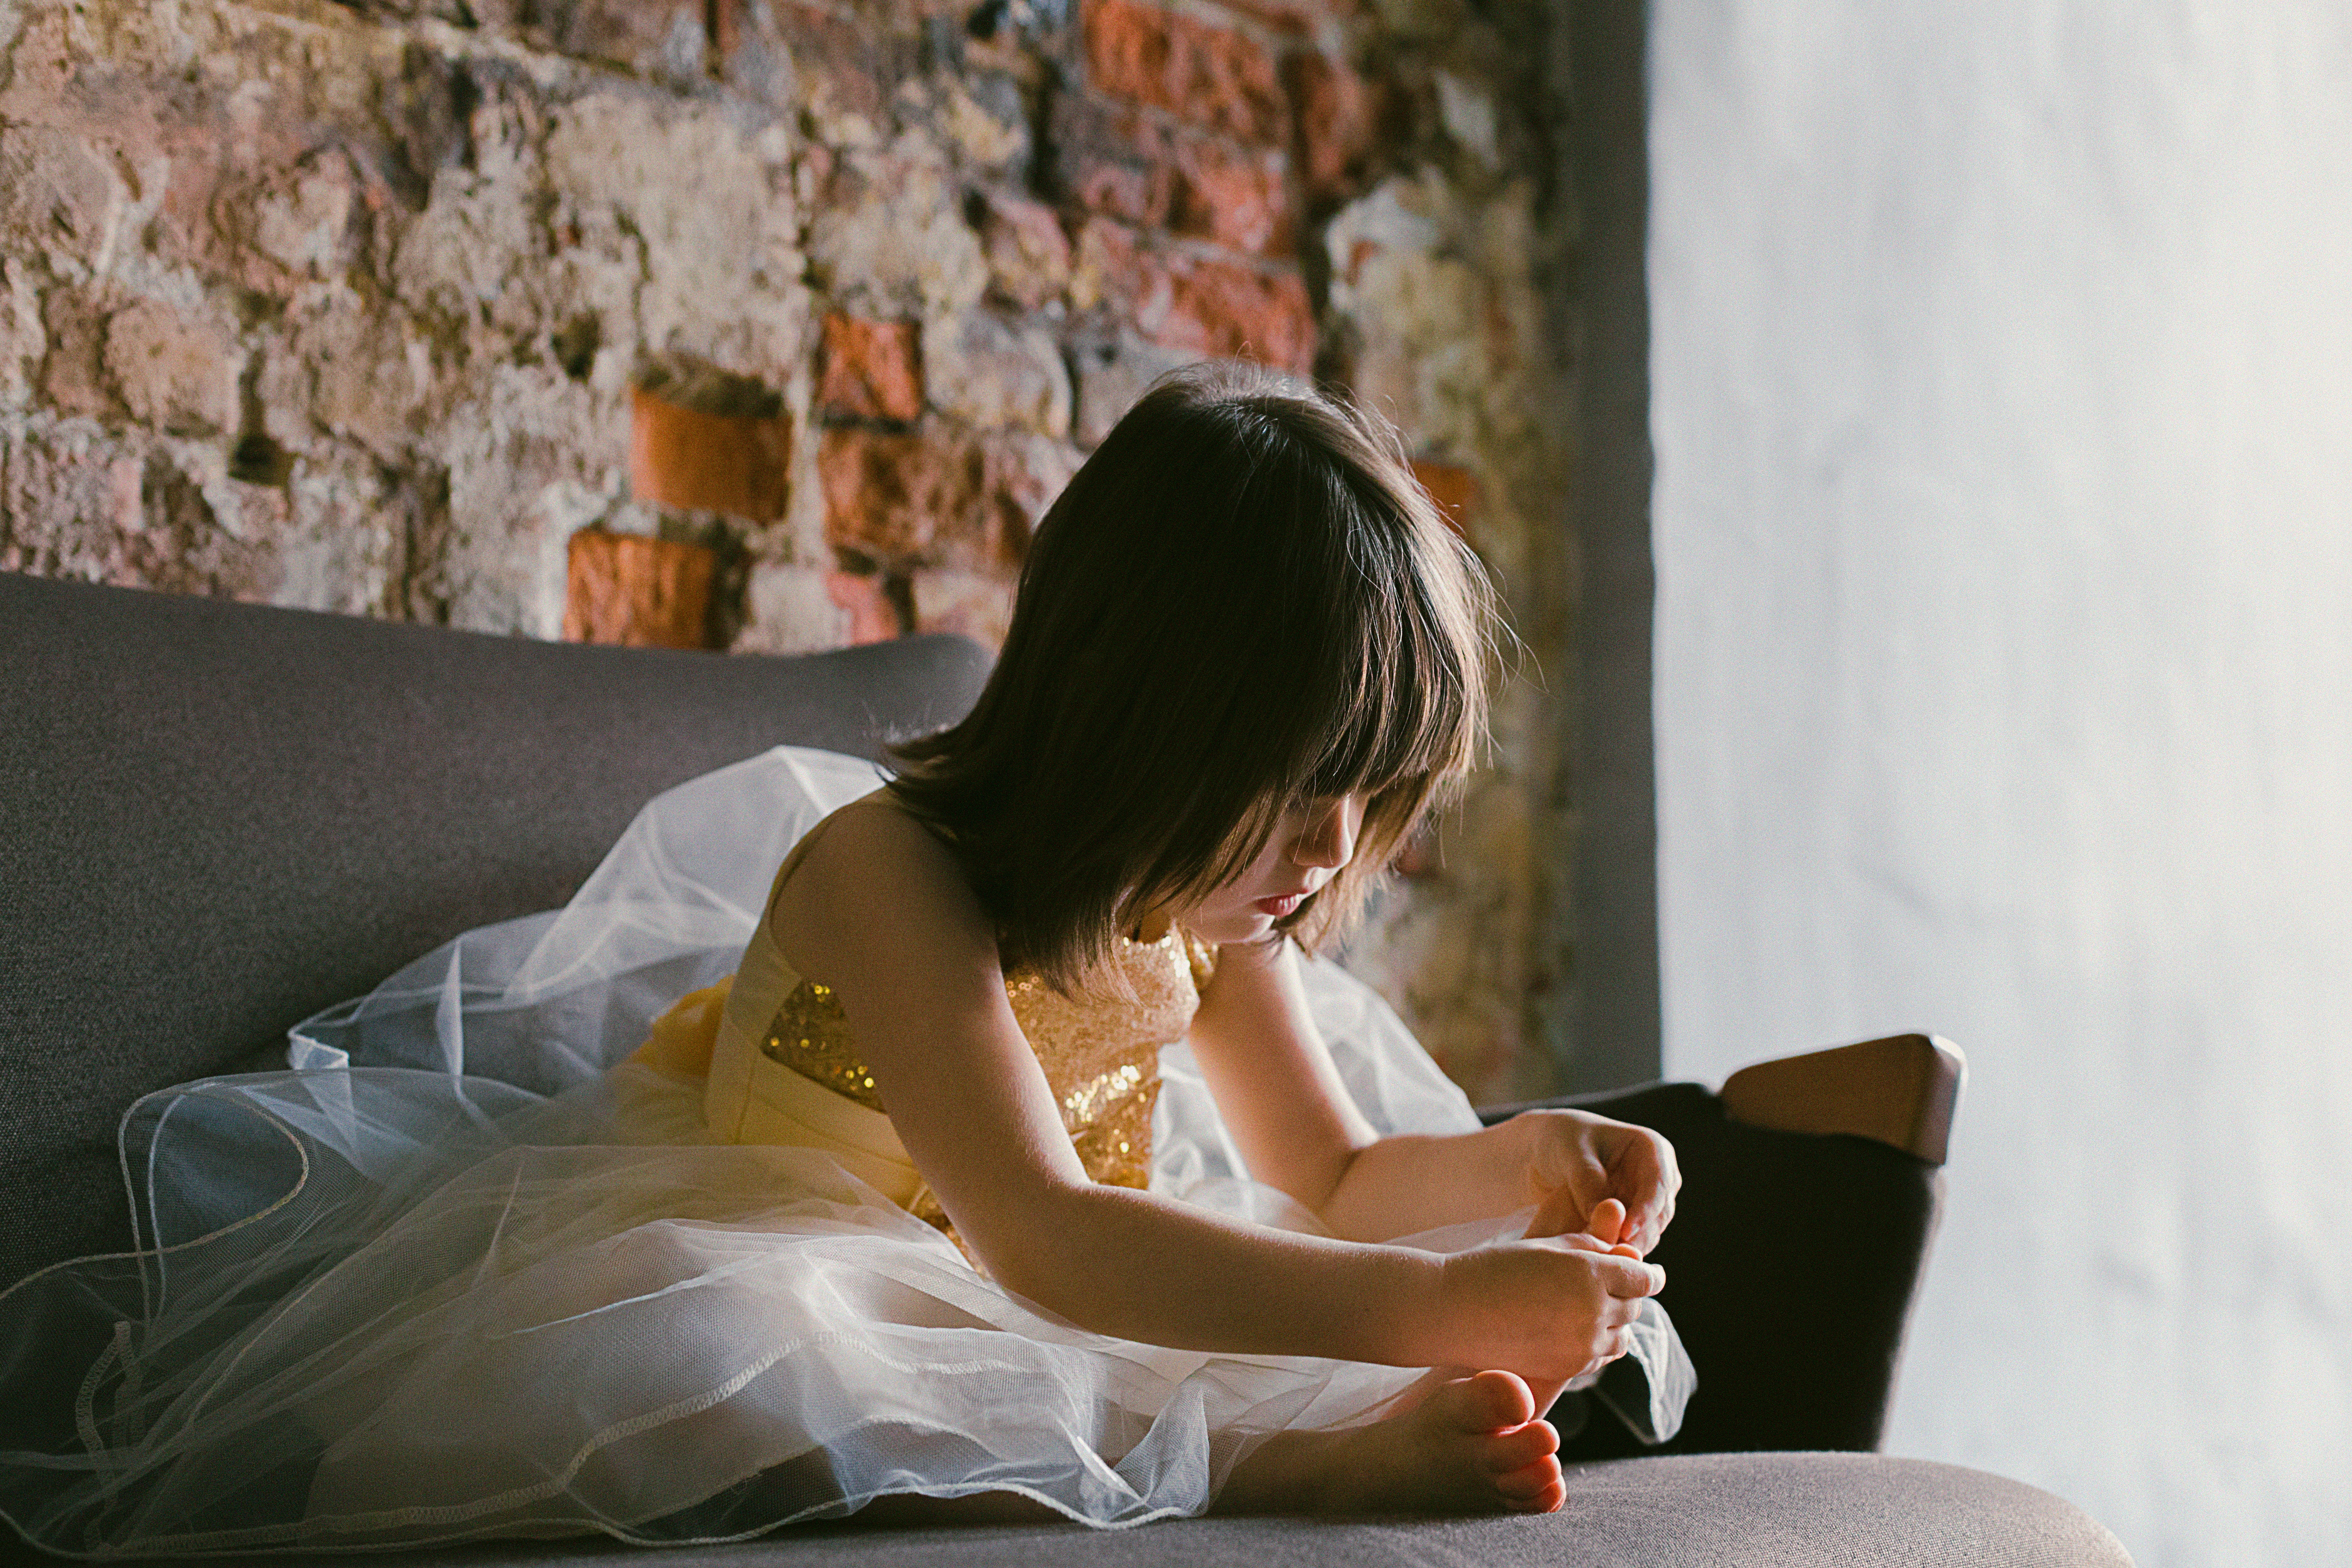 Girl in yellow-and-white dress sitting on couch while holding her foot photo